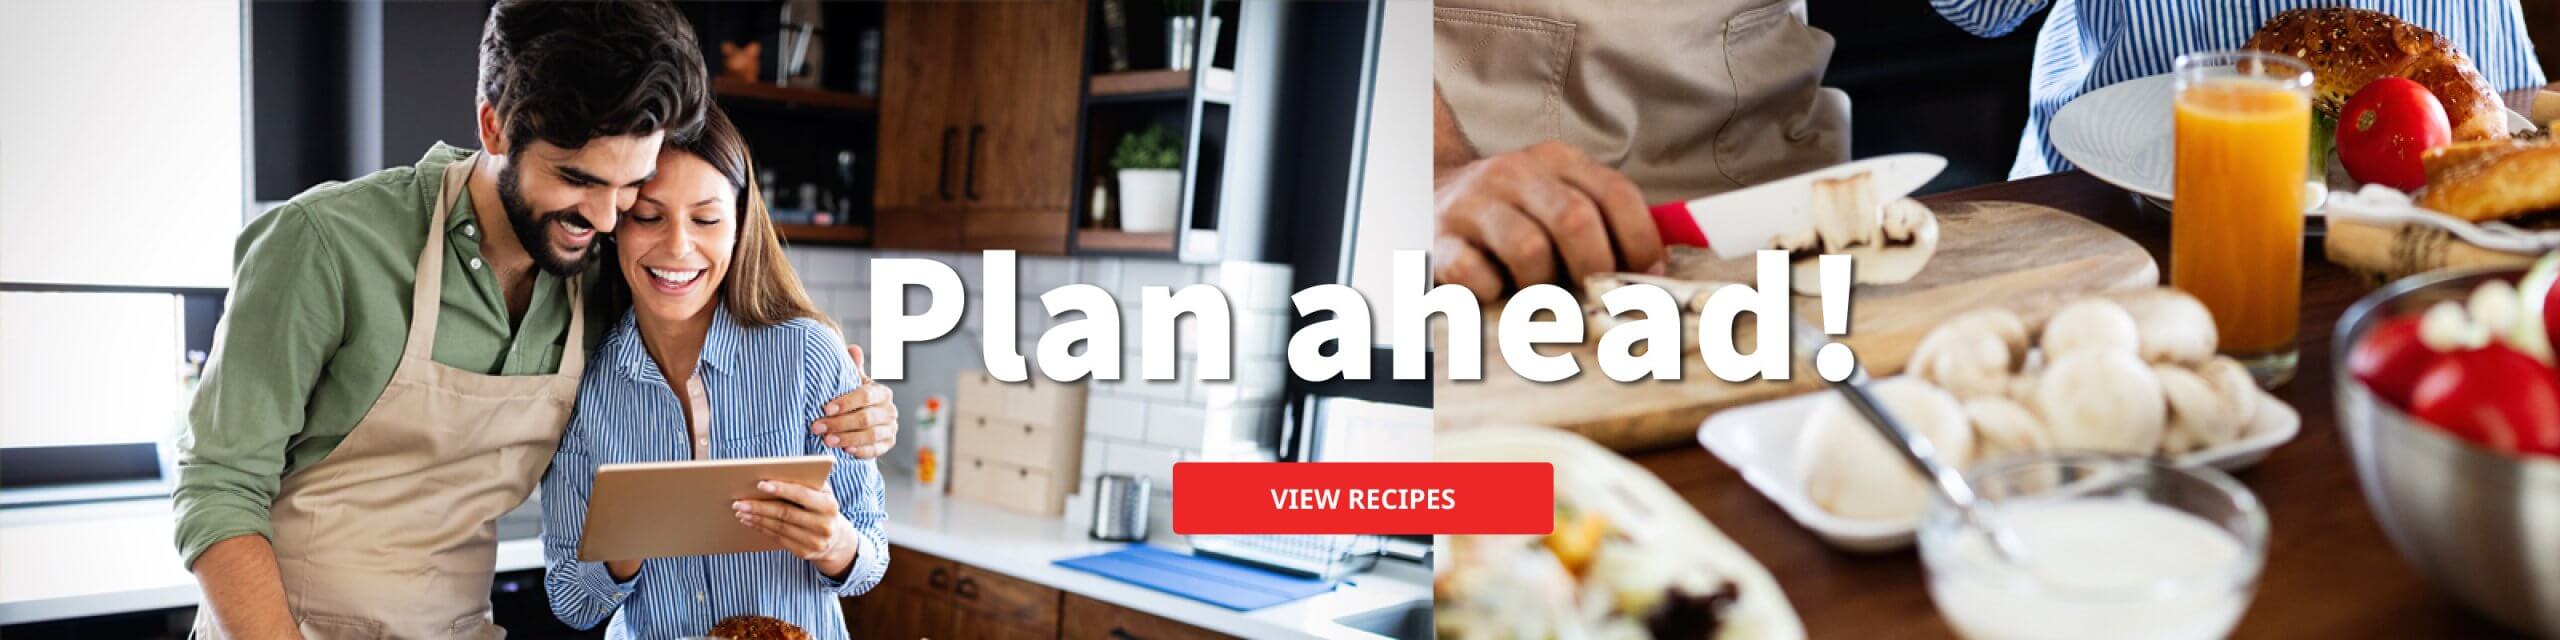 Slider Image for Recipes - Plan Ahead